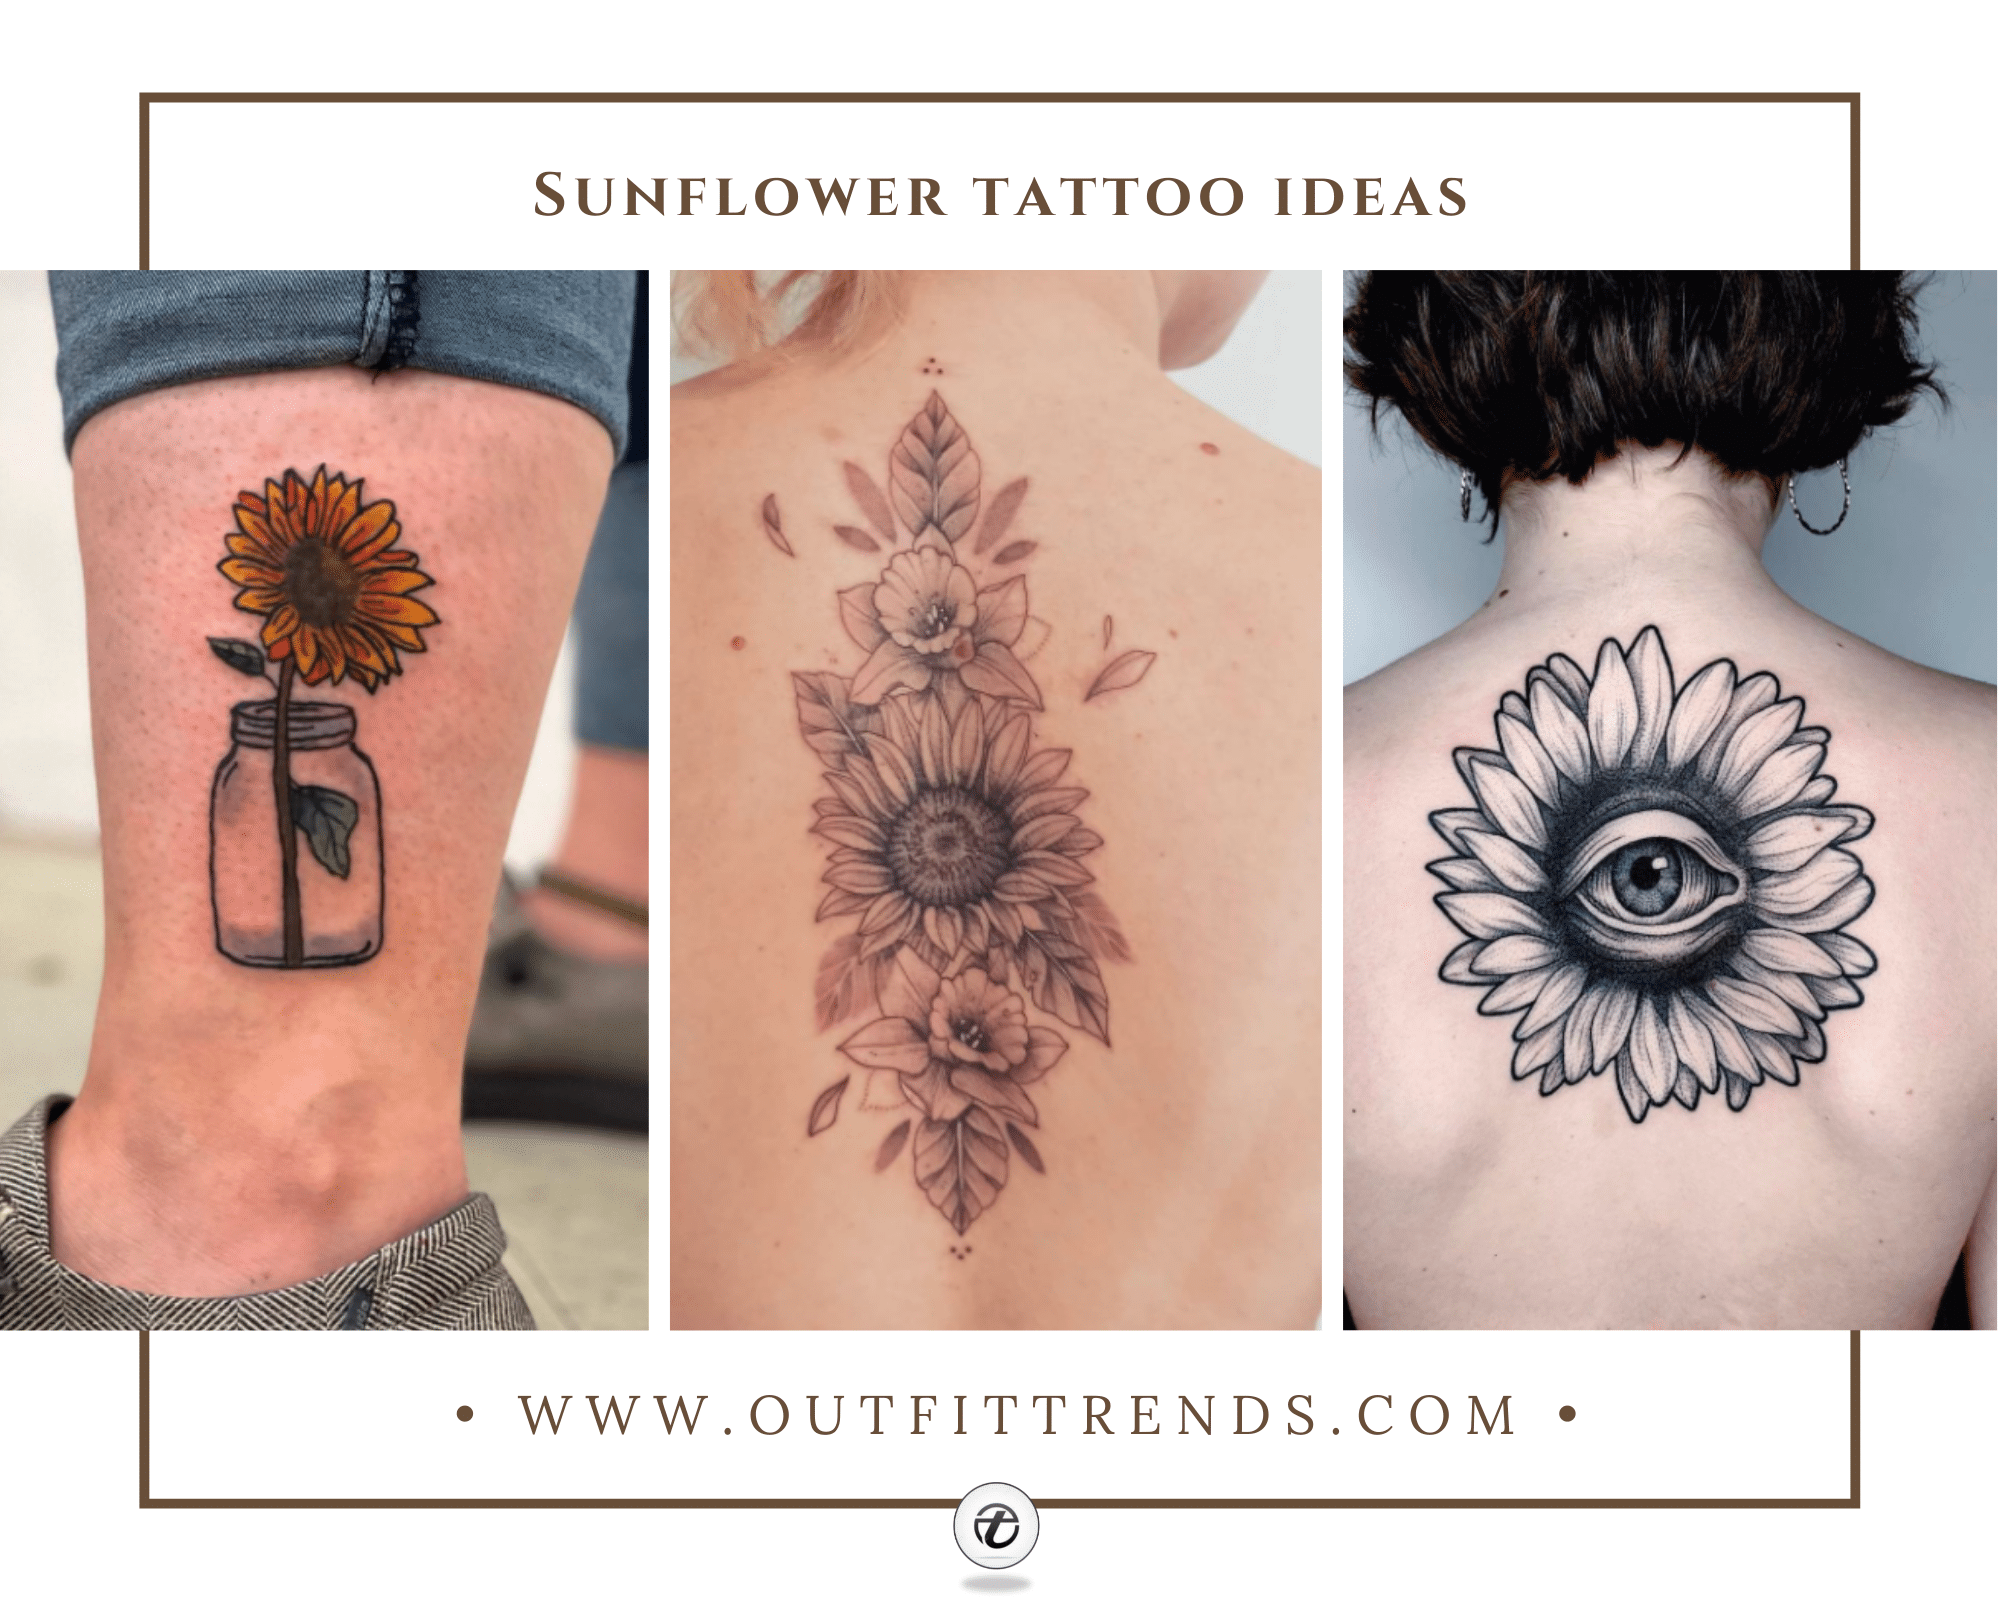 45 Beautiful Sunflower Tattoo Designs and Ideas in 2022